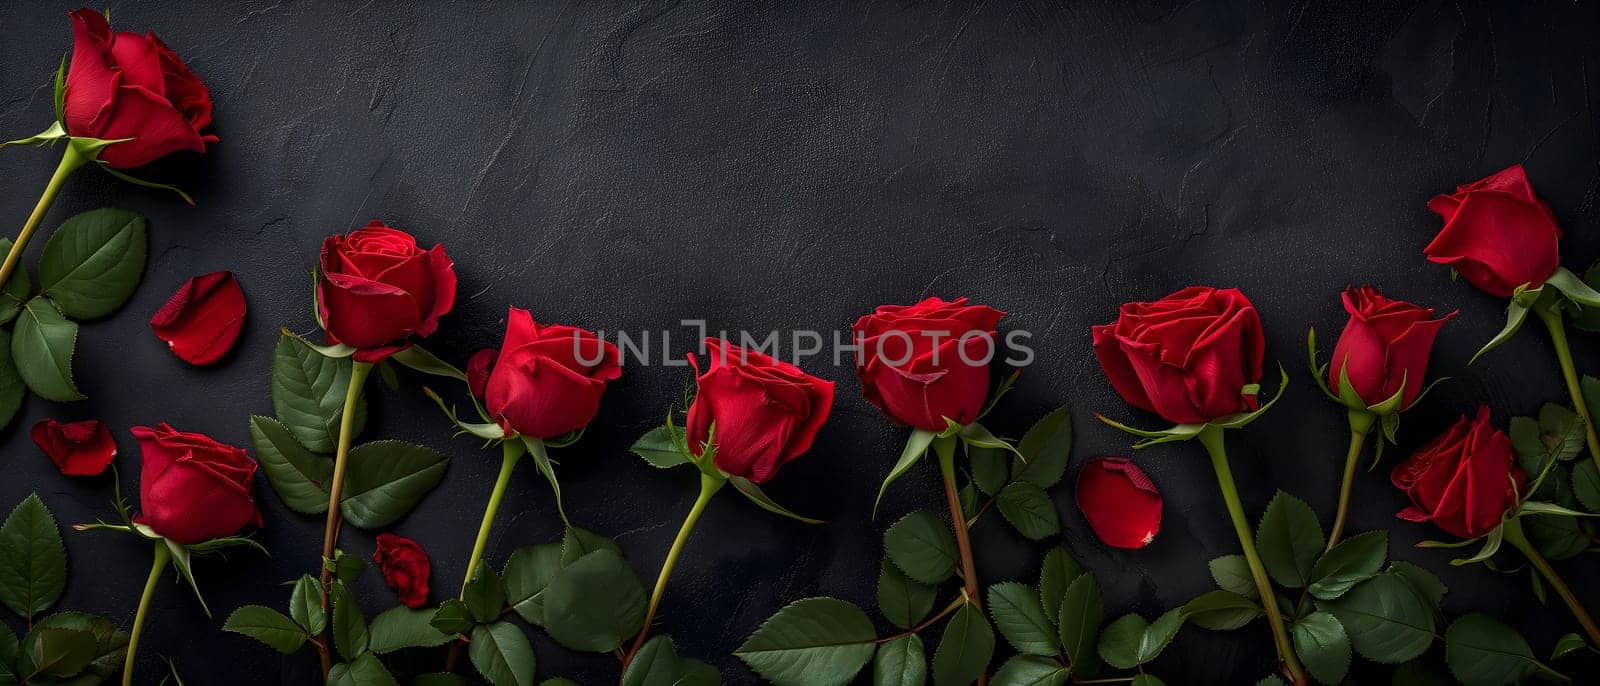 Red roses on black background with copy space. Neural network generated image. Not based on any actual person or scene.